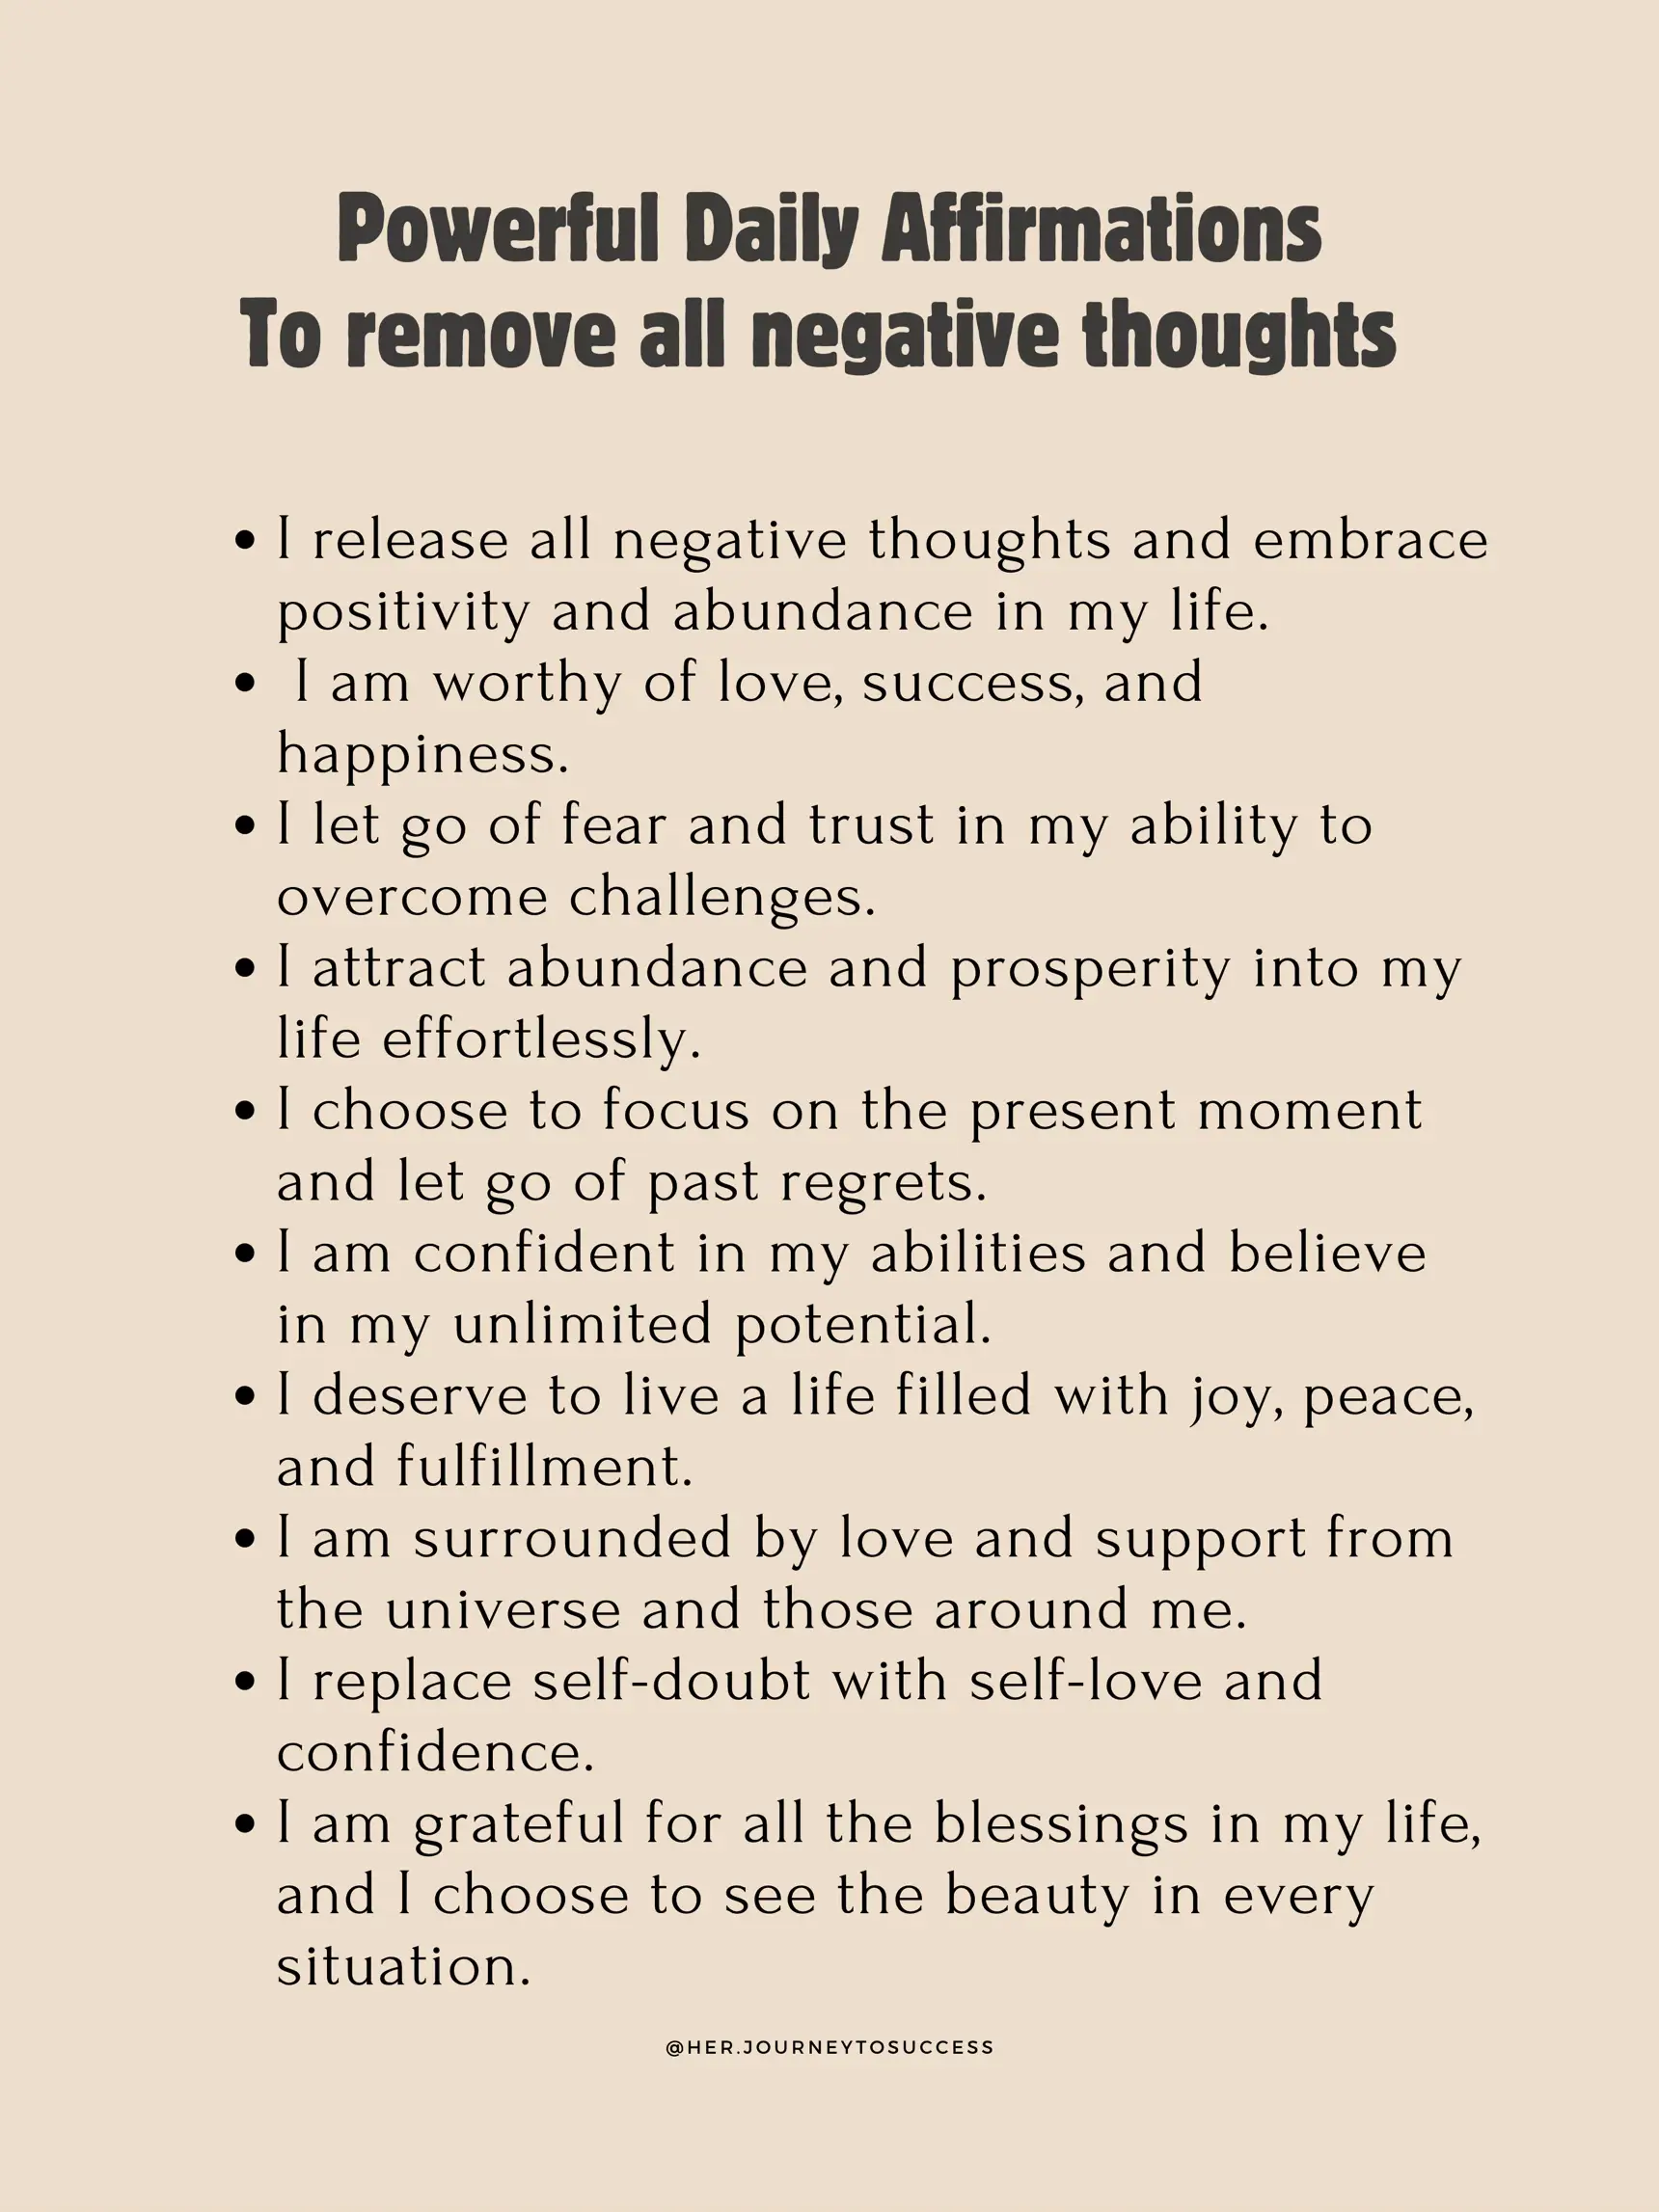 63 Negative People Quotes to Purge Negativity From Your Life